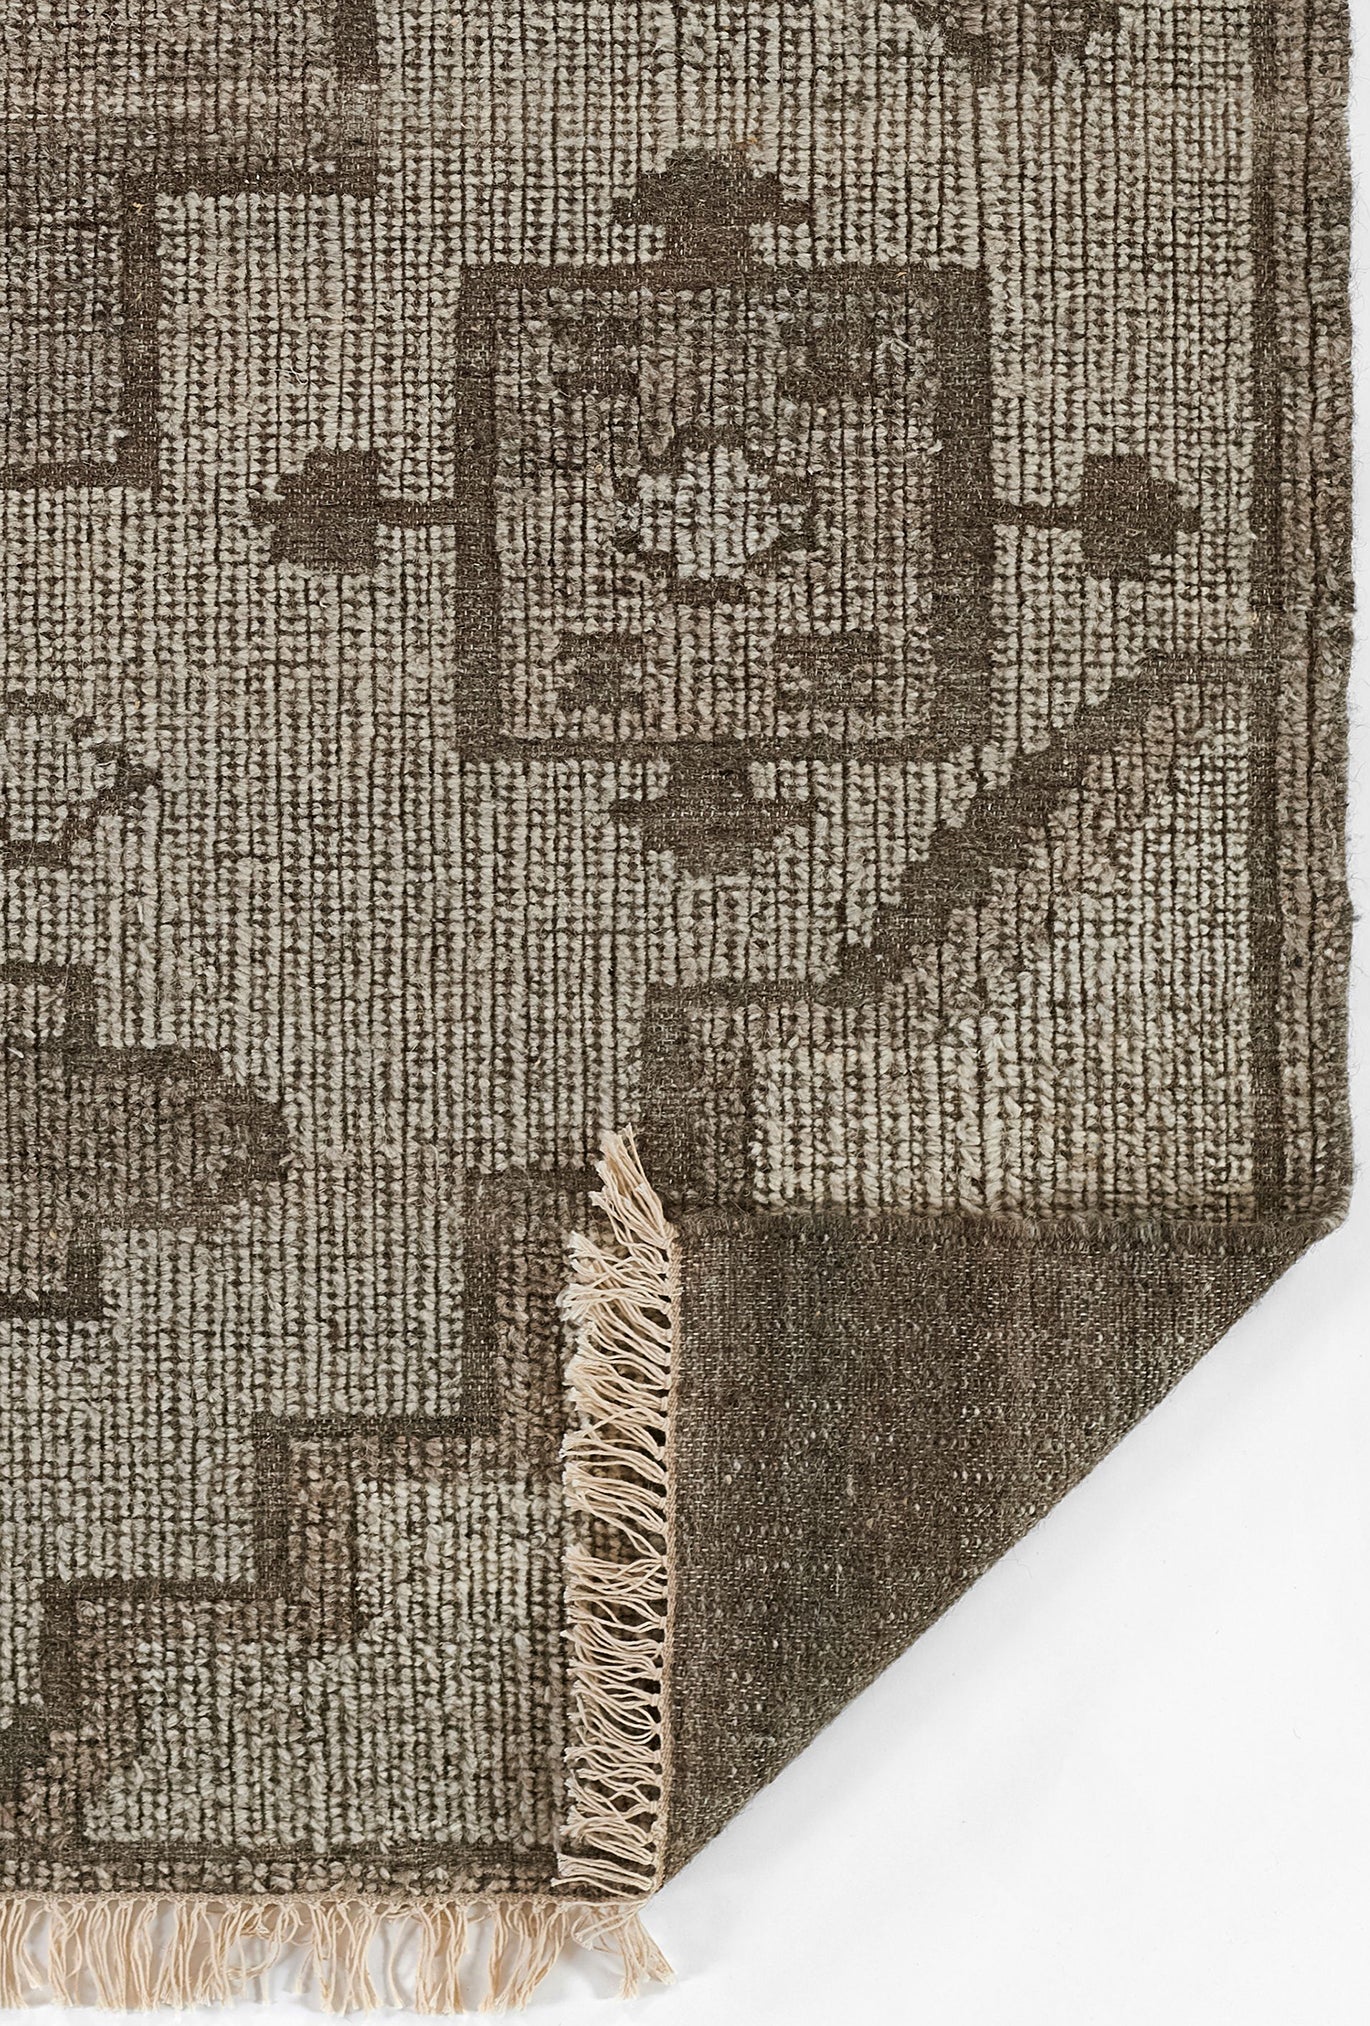 Moroccan Hand Woven Wool & Cotton Natural Tone Area Rug